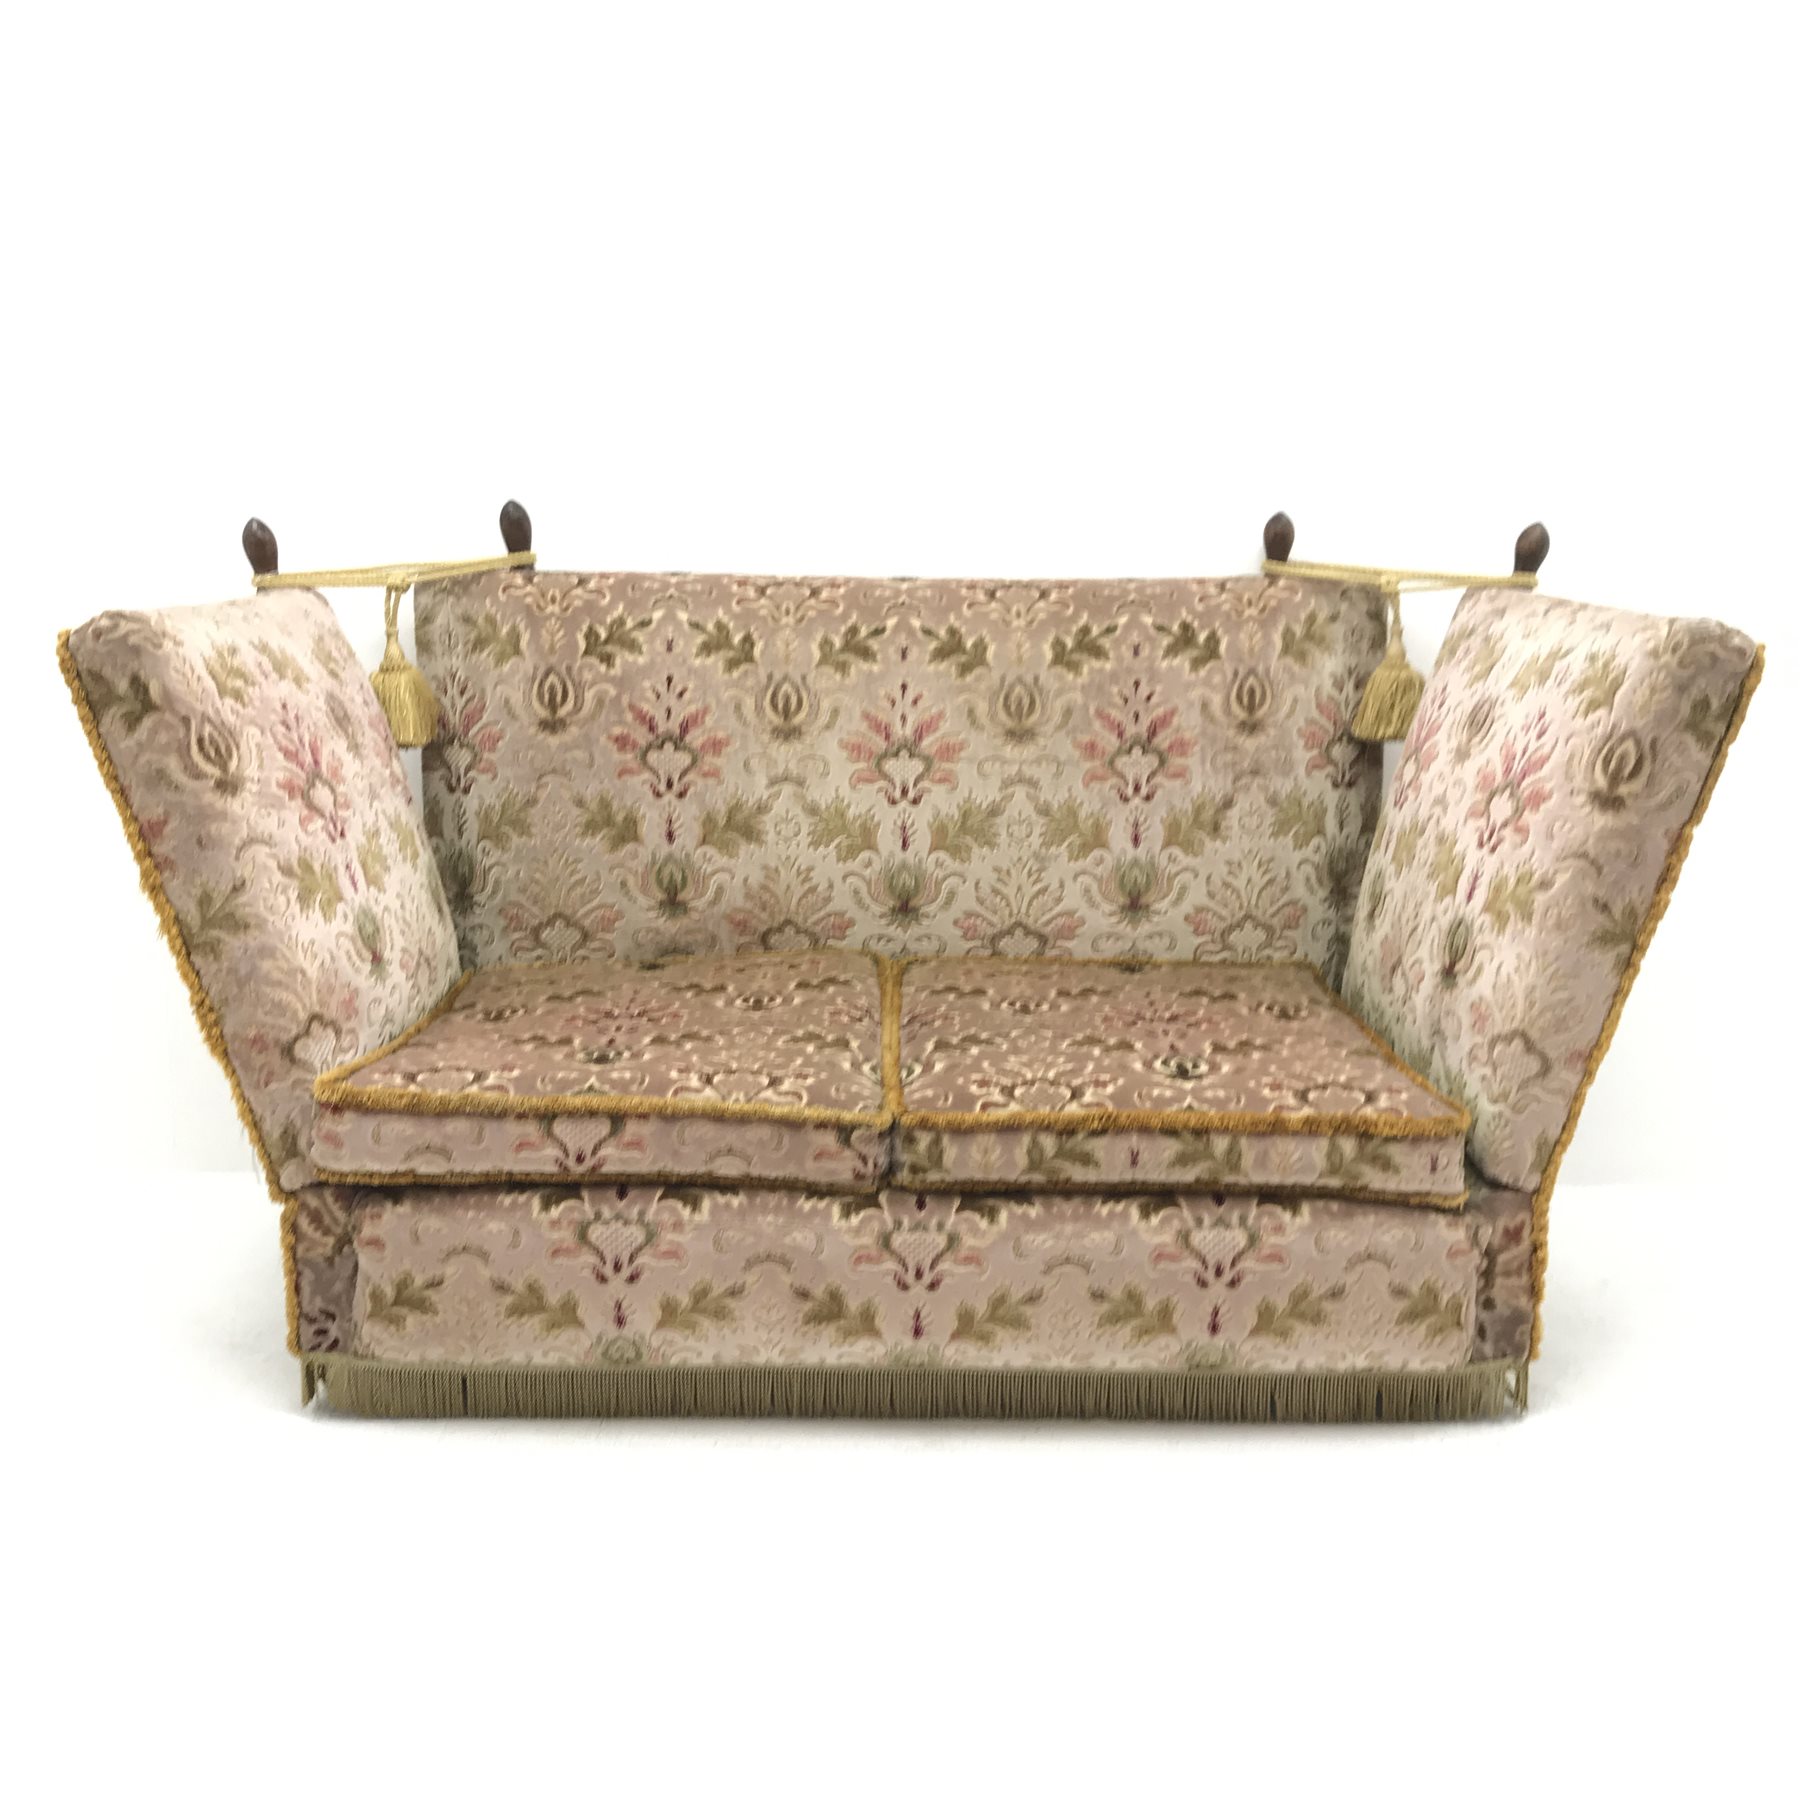 Traditional two seat Knoll style sofa, upholstered in a beige ground fabric, W163cm - Image 2 of 4